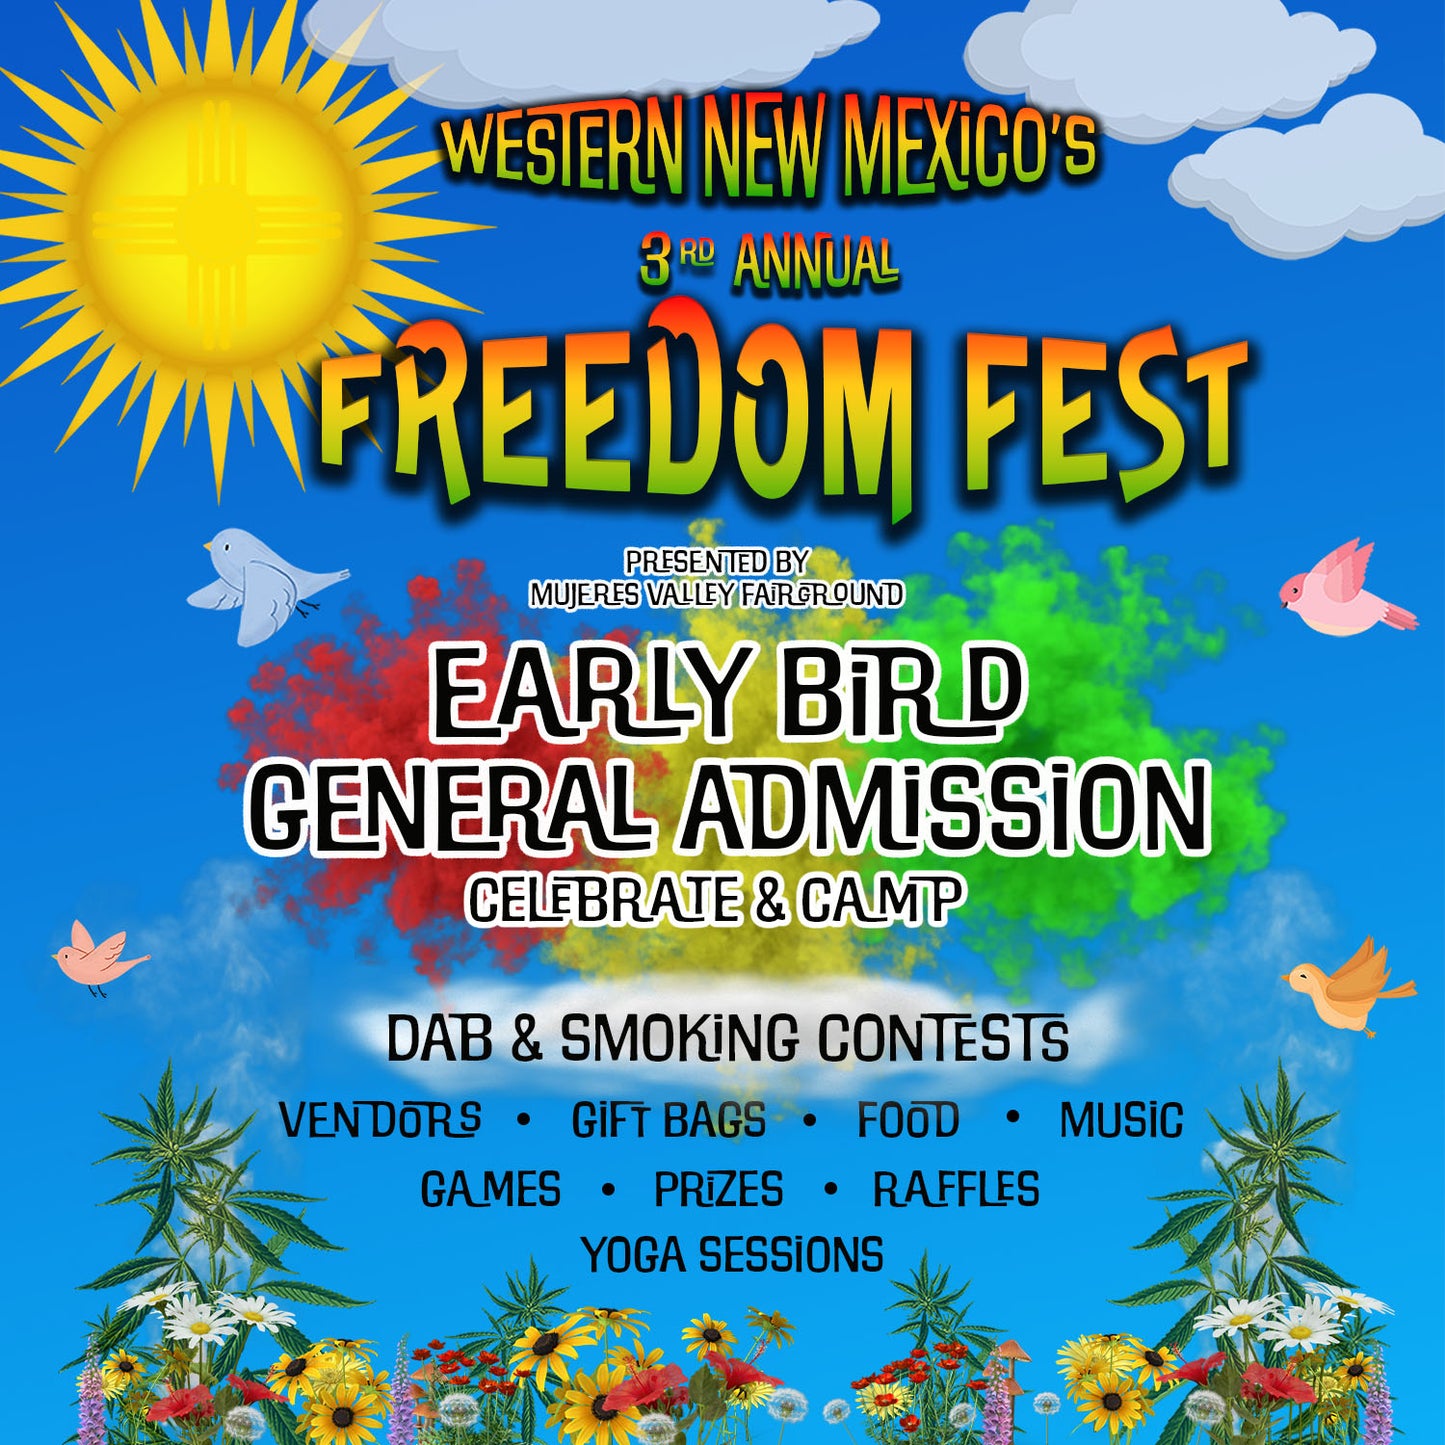 Early Bird General Admission for the 3rd Annual Freedom Festival